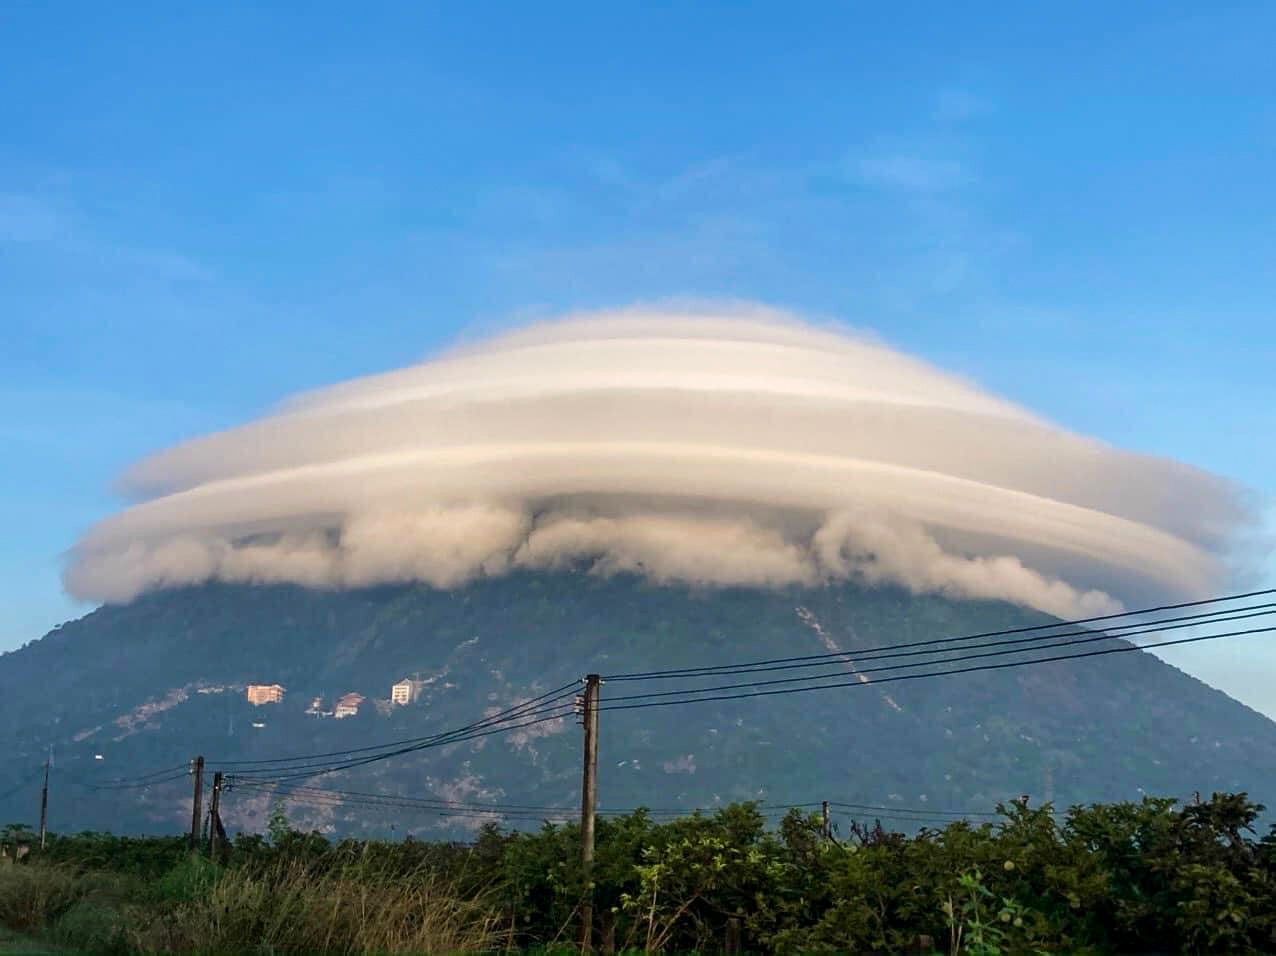 UFO-shaped clouds form over southern Vietnam mountain